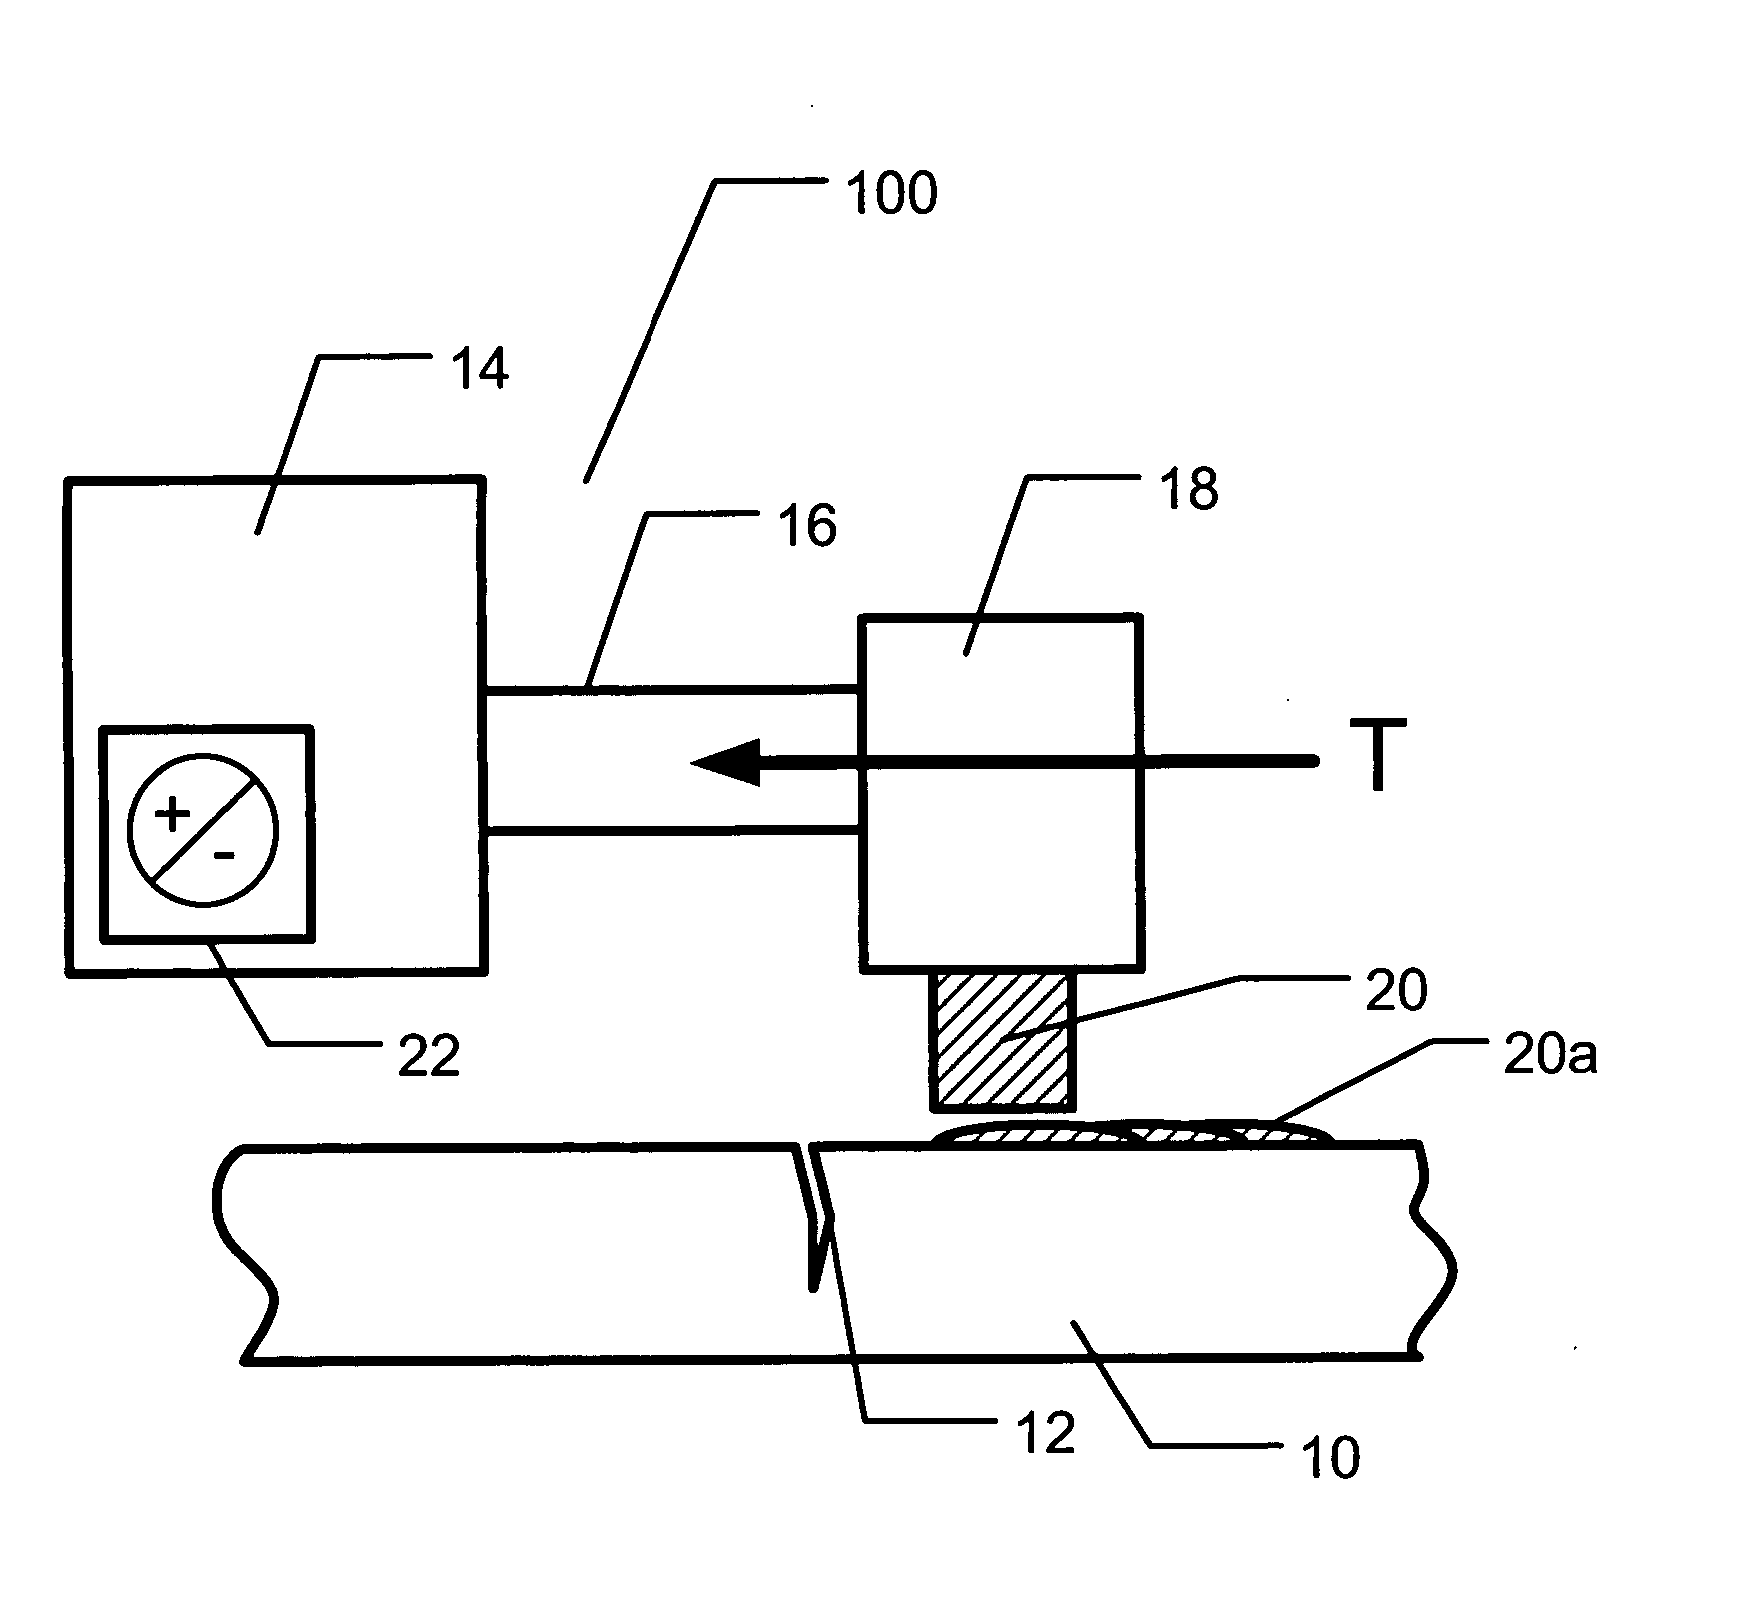 Apparatus and method for electrofriction welding